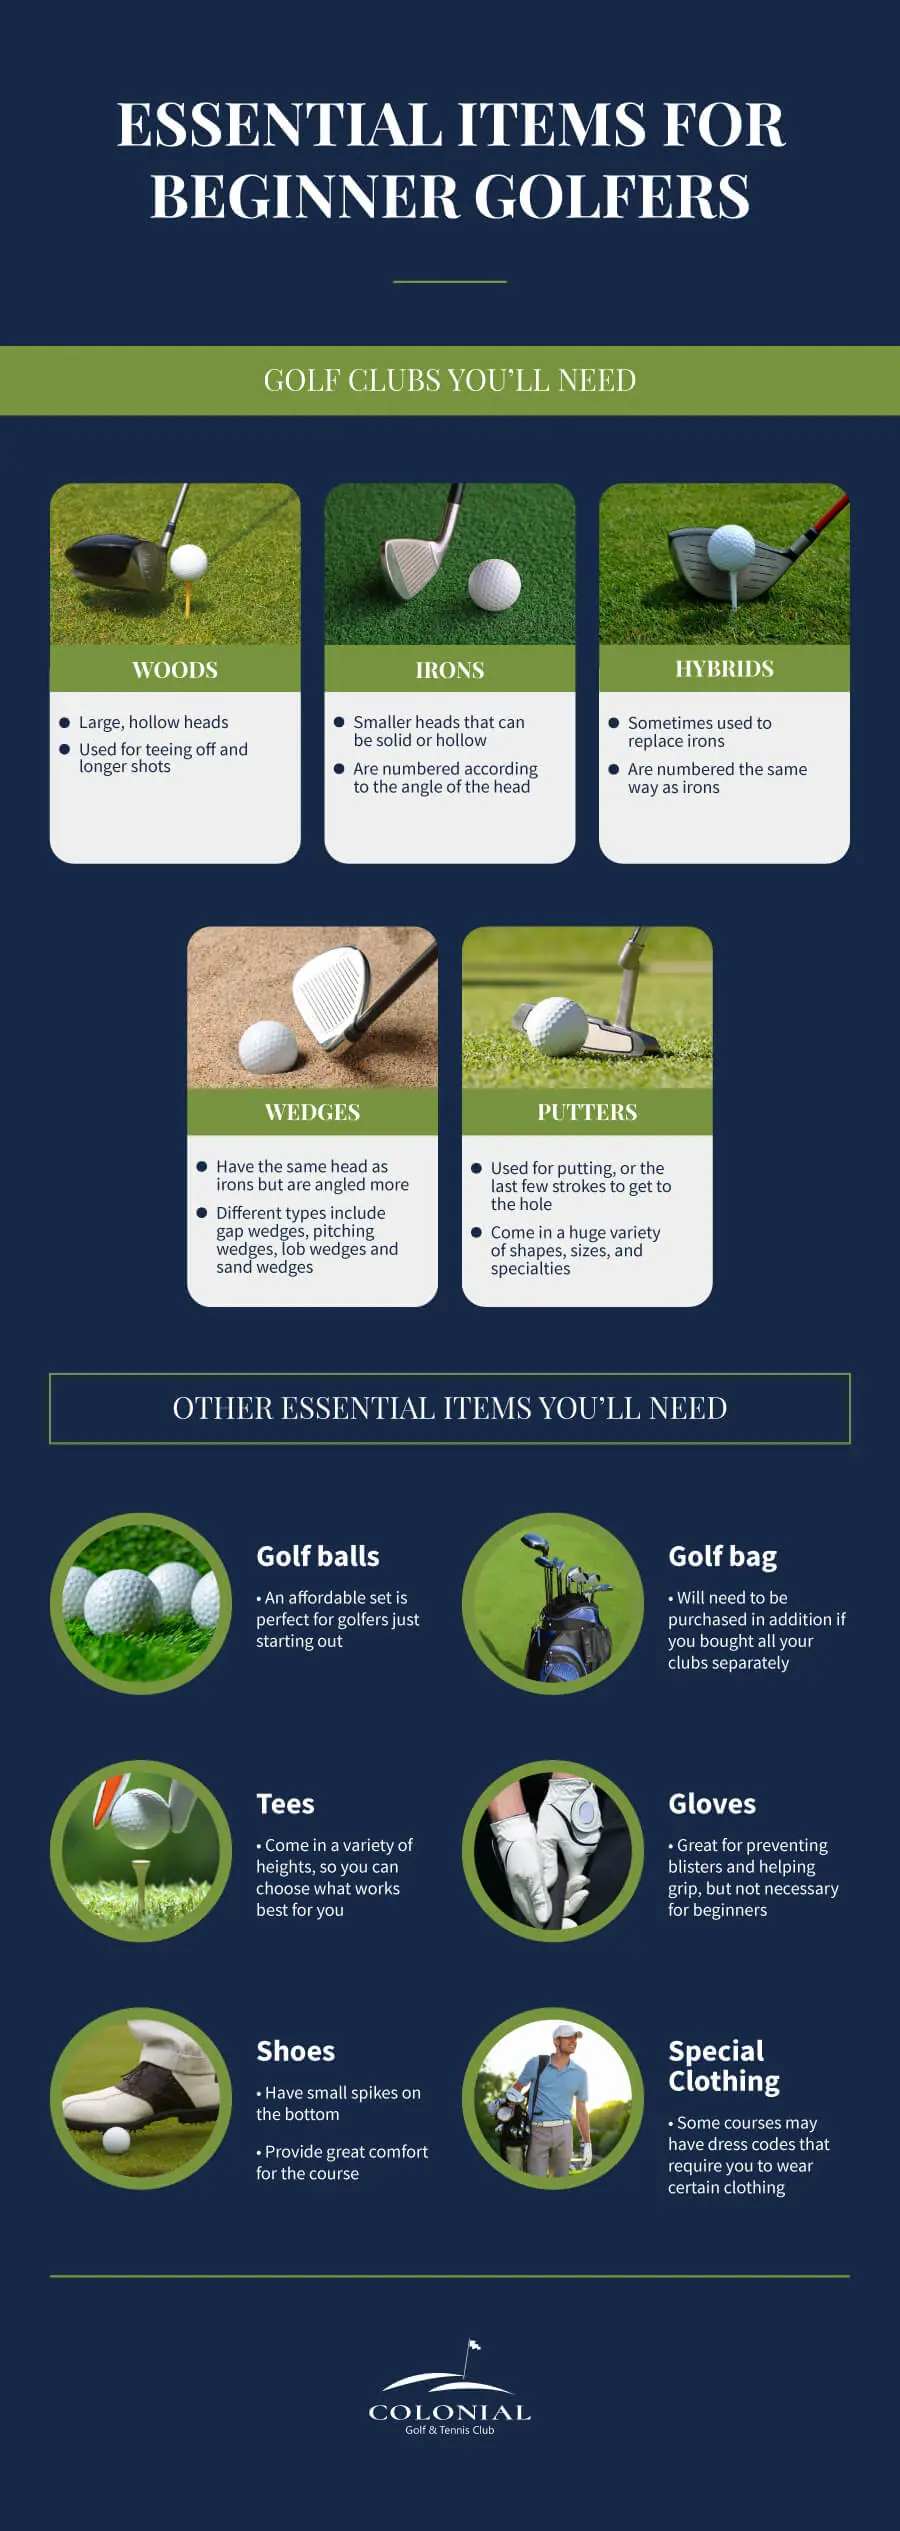 What golf clubs do beginners need?